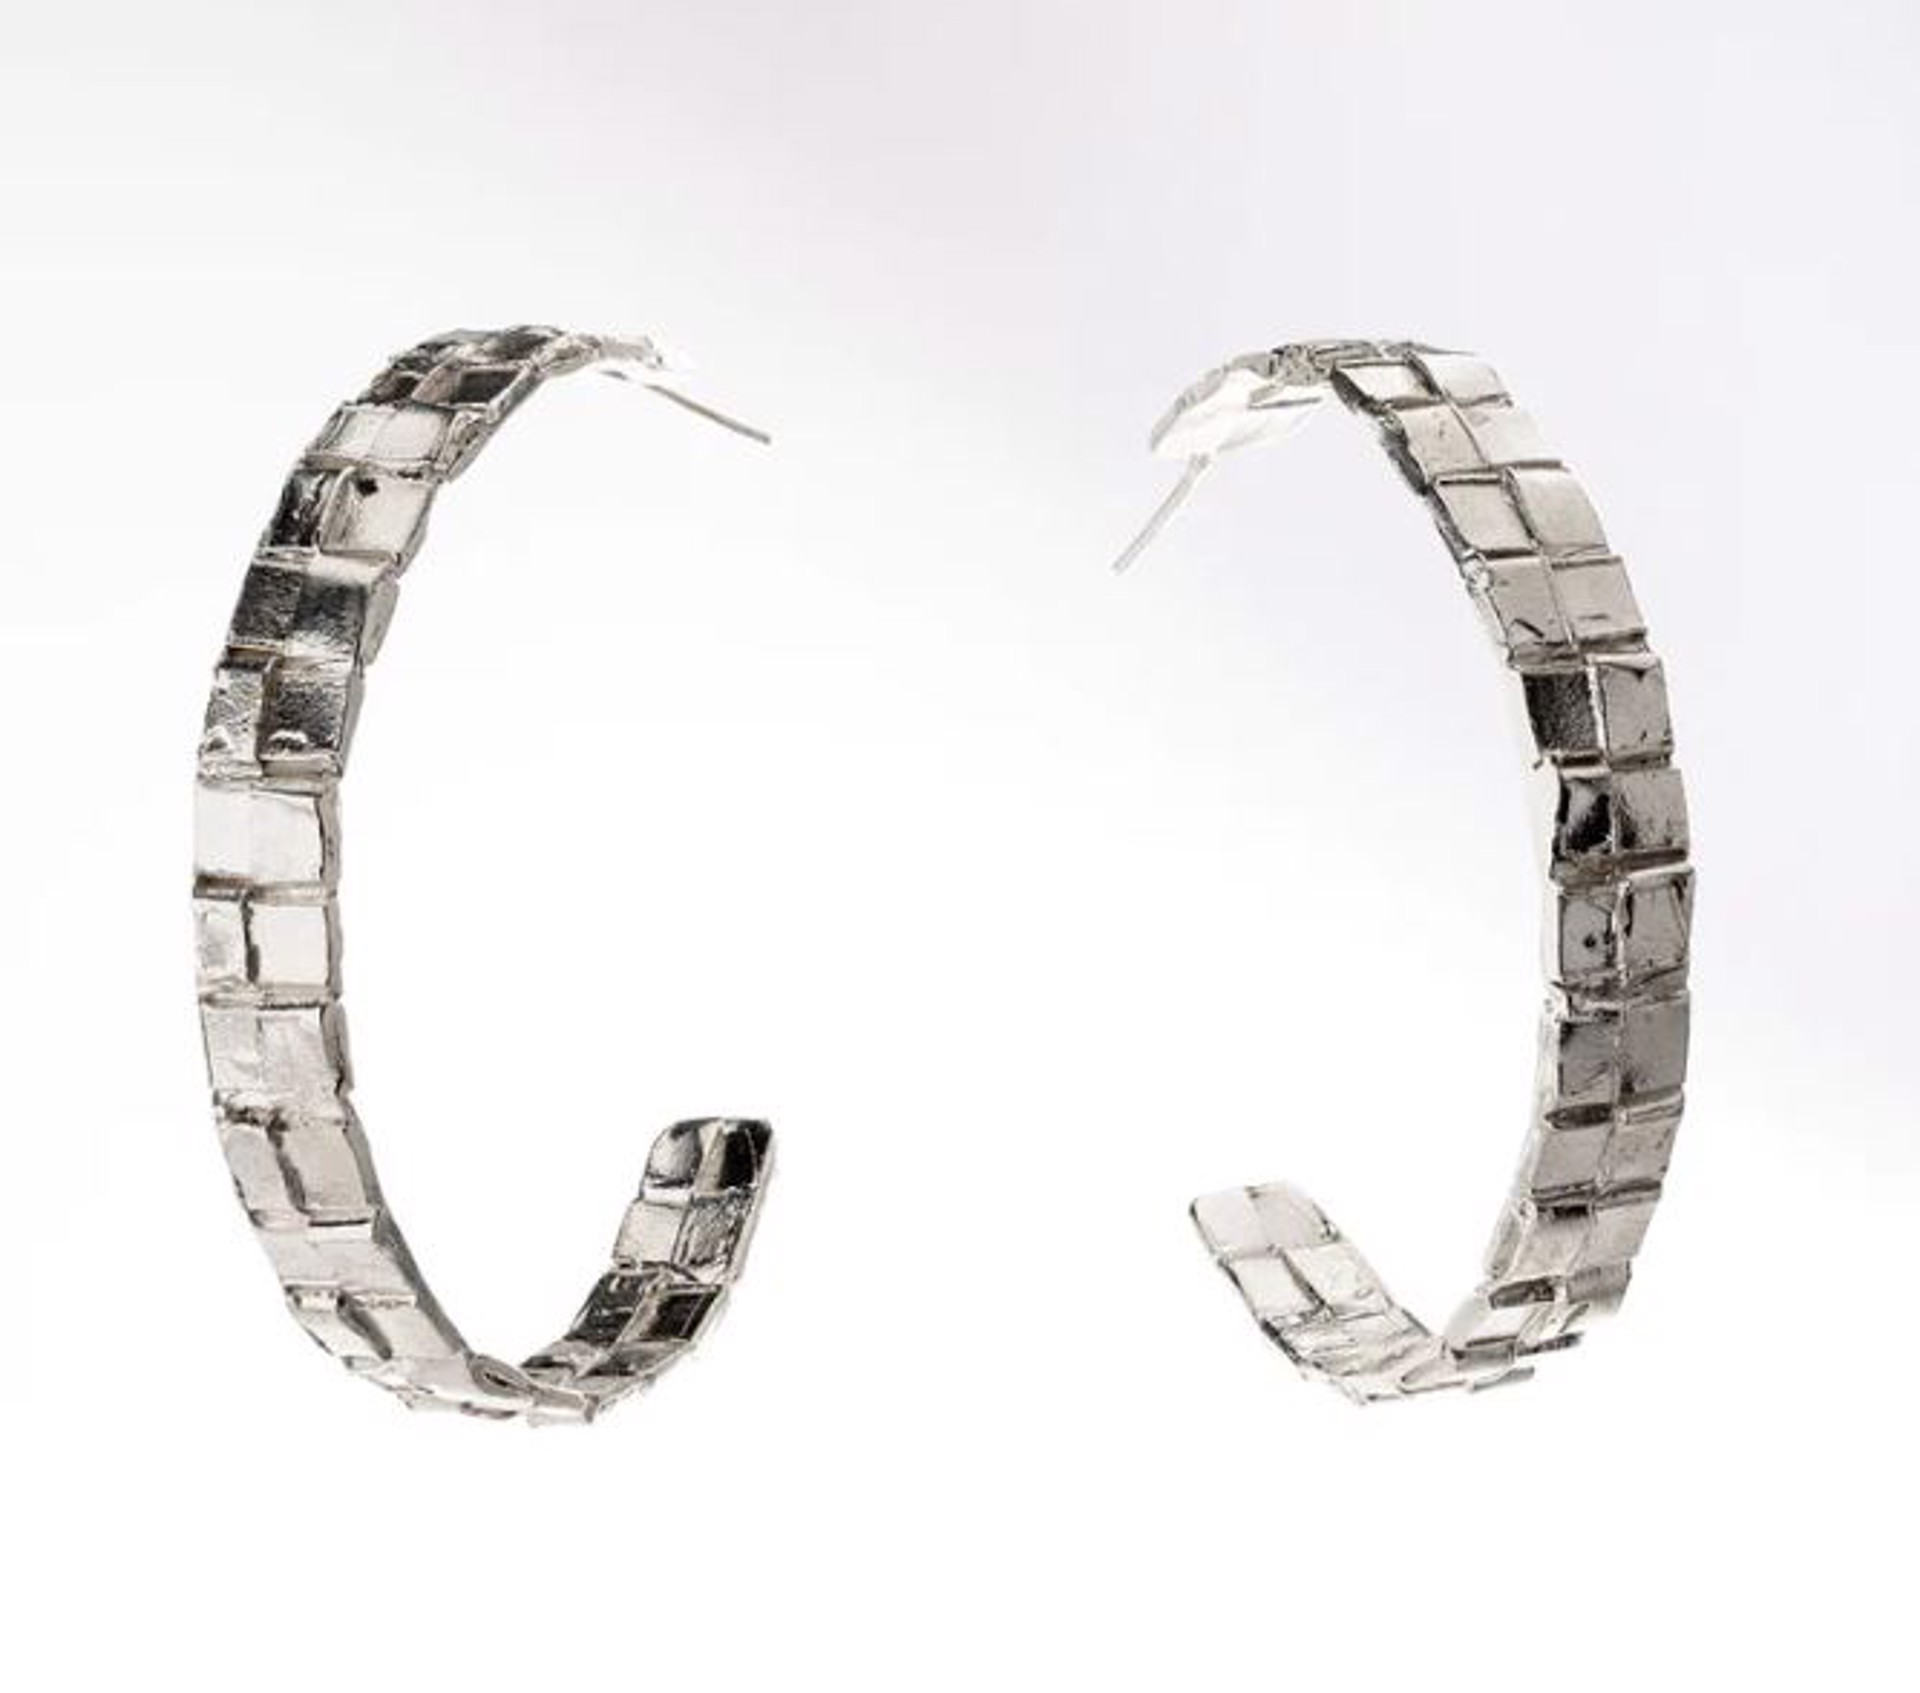 Large Double Woven Hoop Earrings - Sterling Silver by Sydnie Wainland